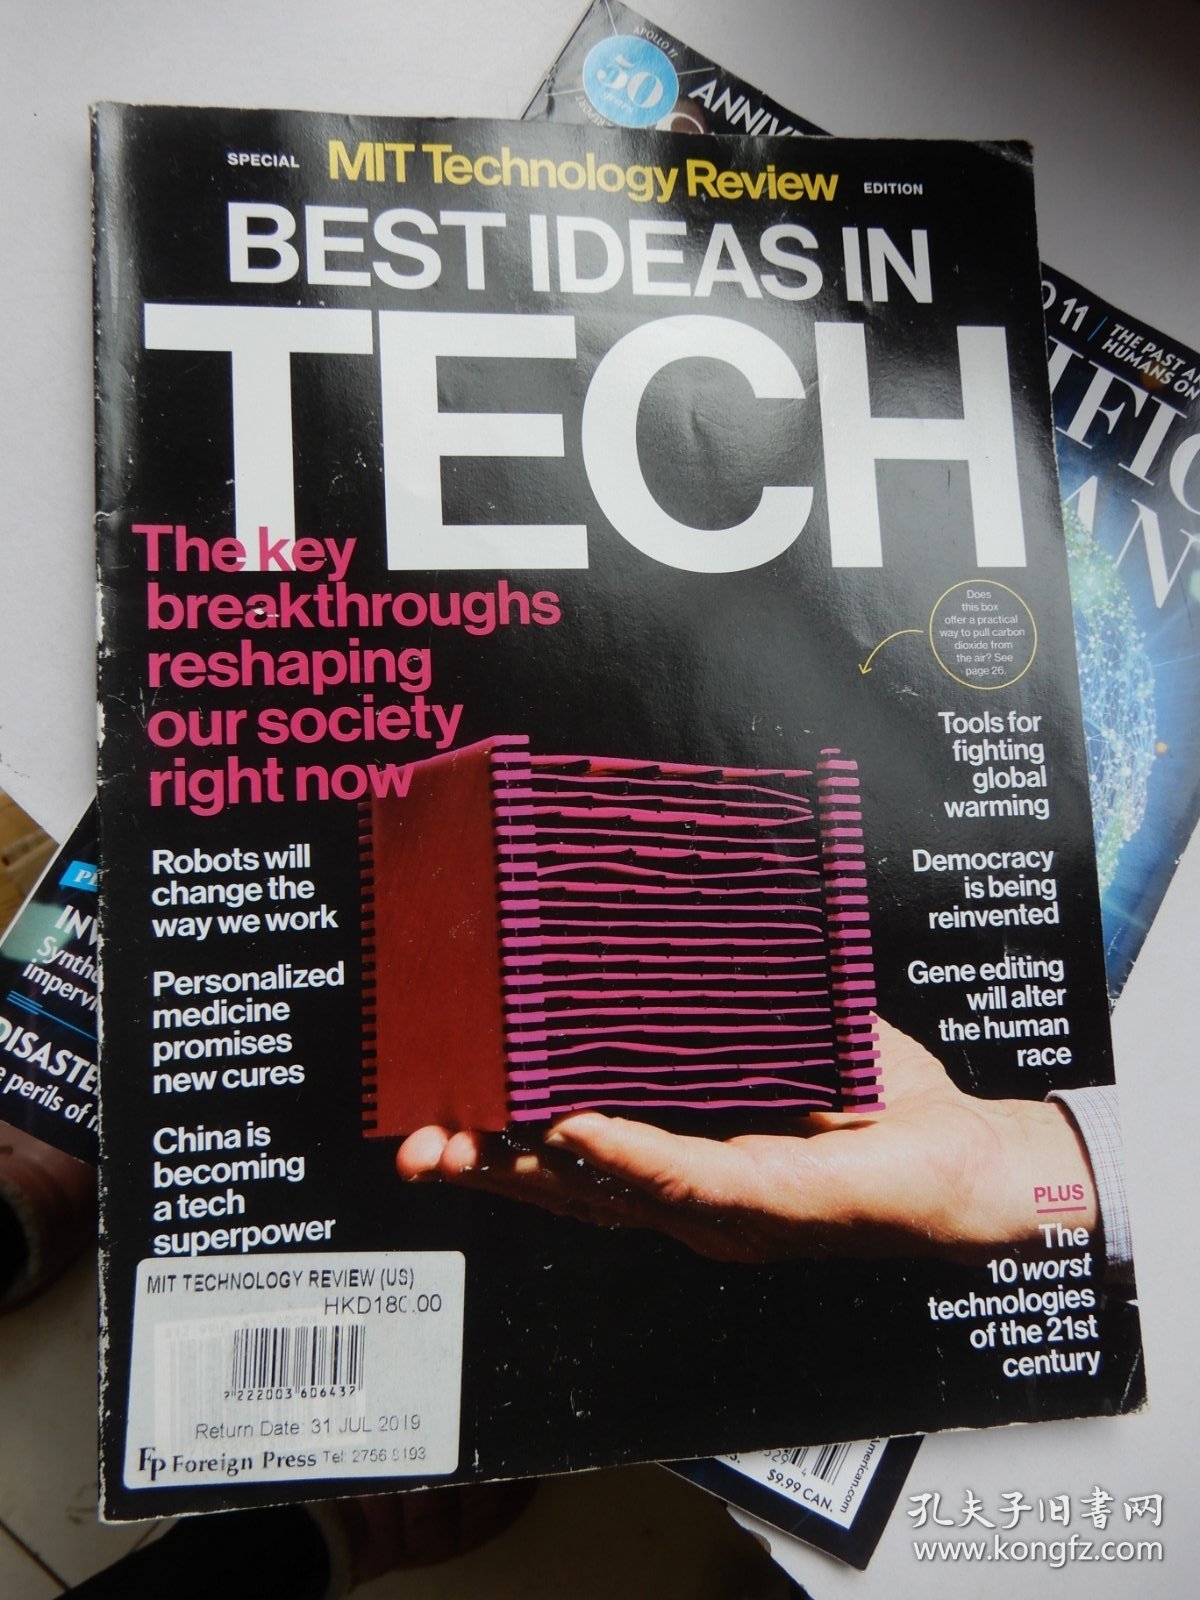 Best Ideas In Tech ：the key breakthroughs reshaping our society right now